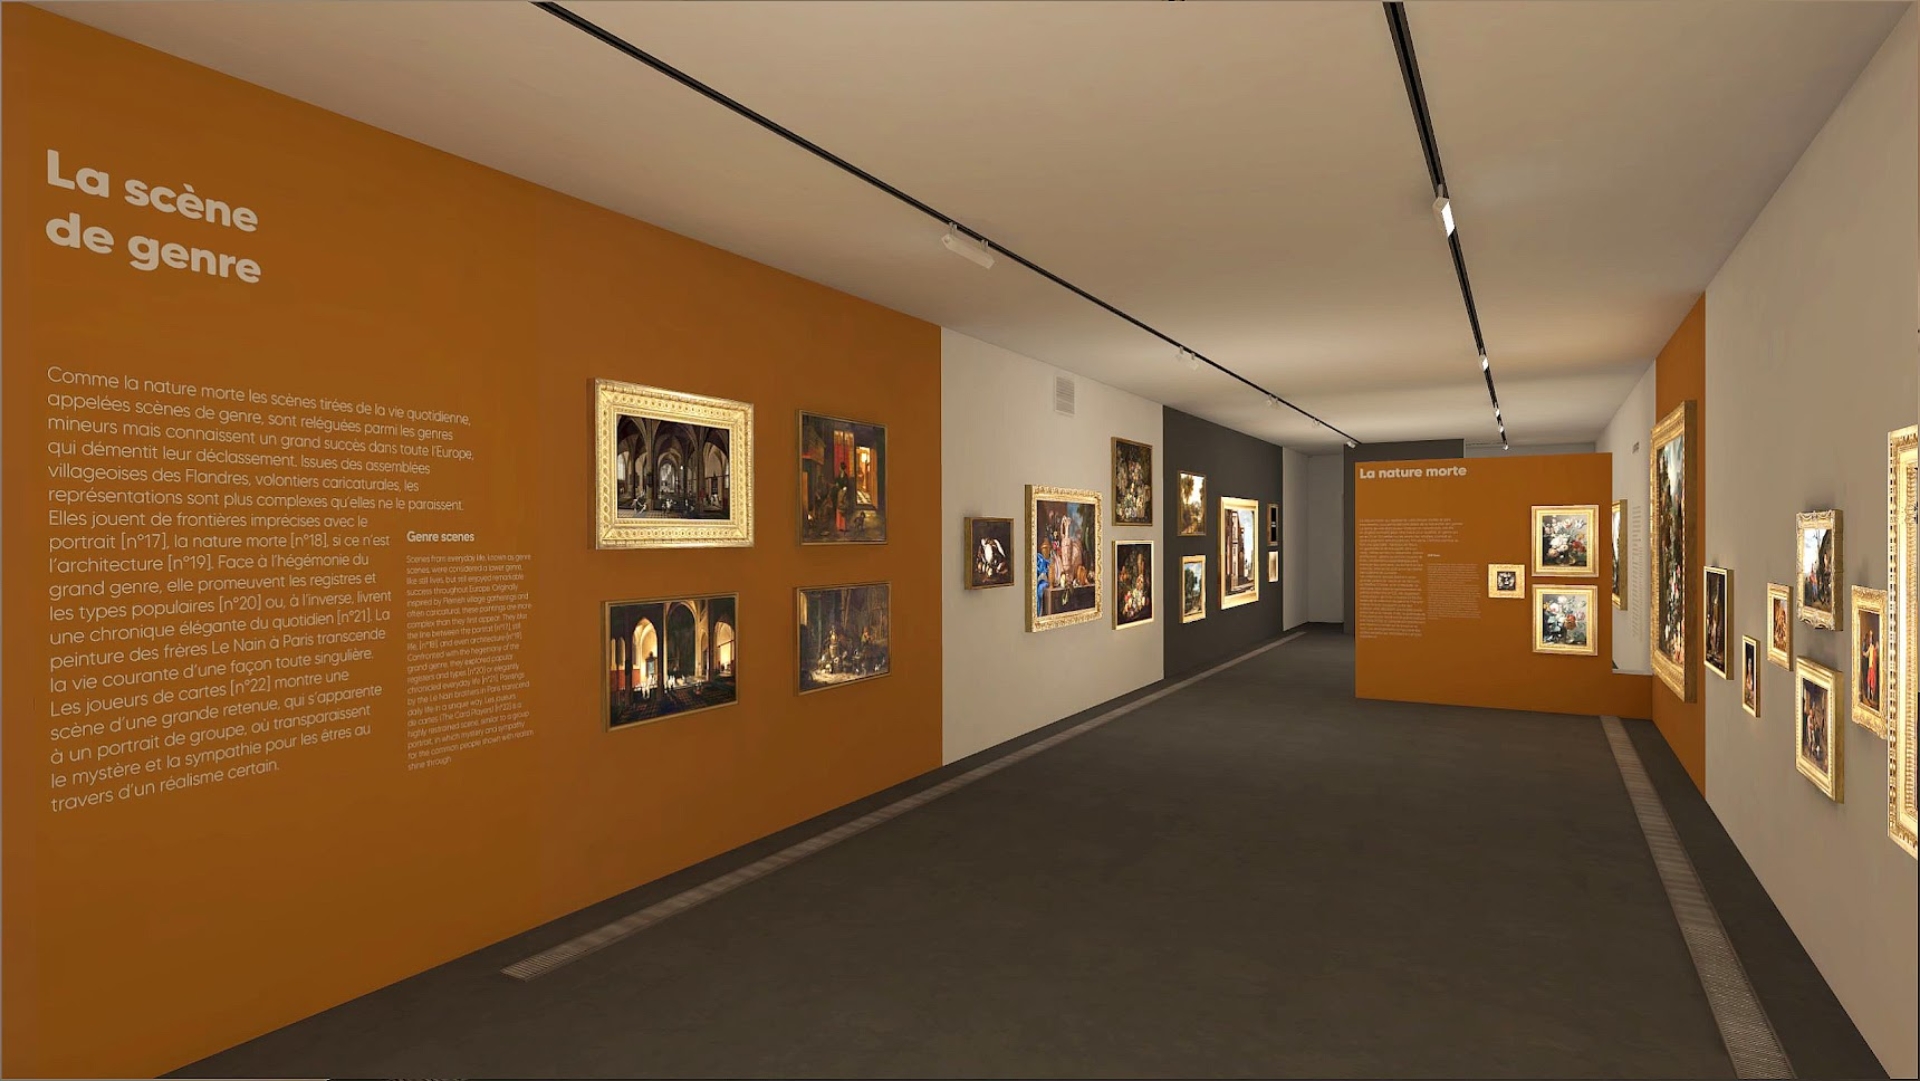 In development by Ocel: the permanent collections of the Musée Granet in virtual reality